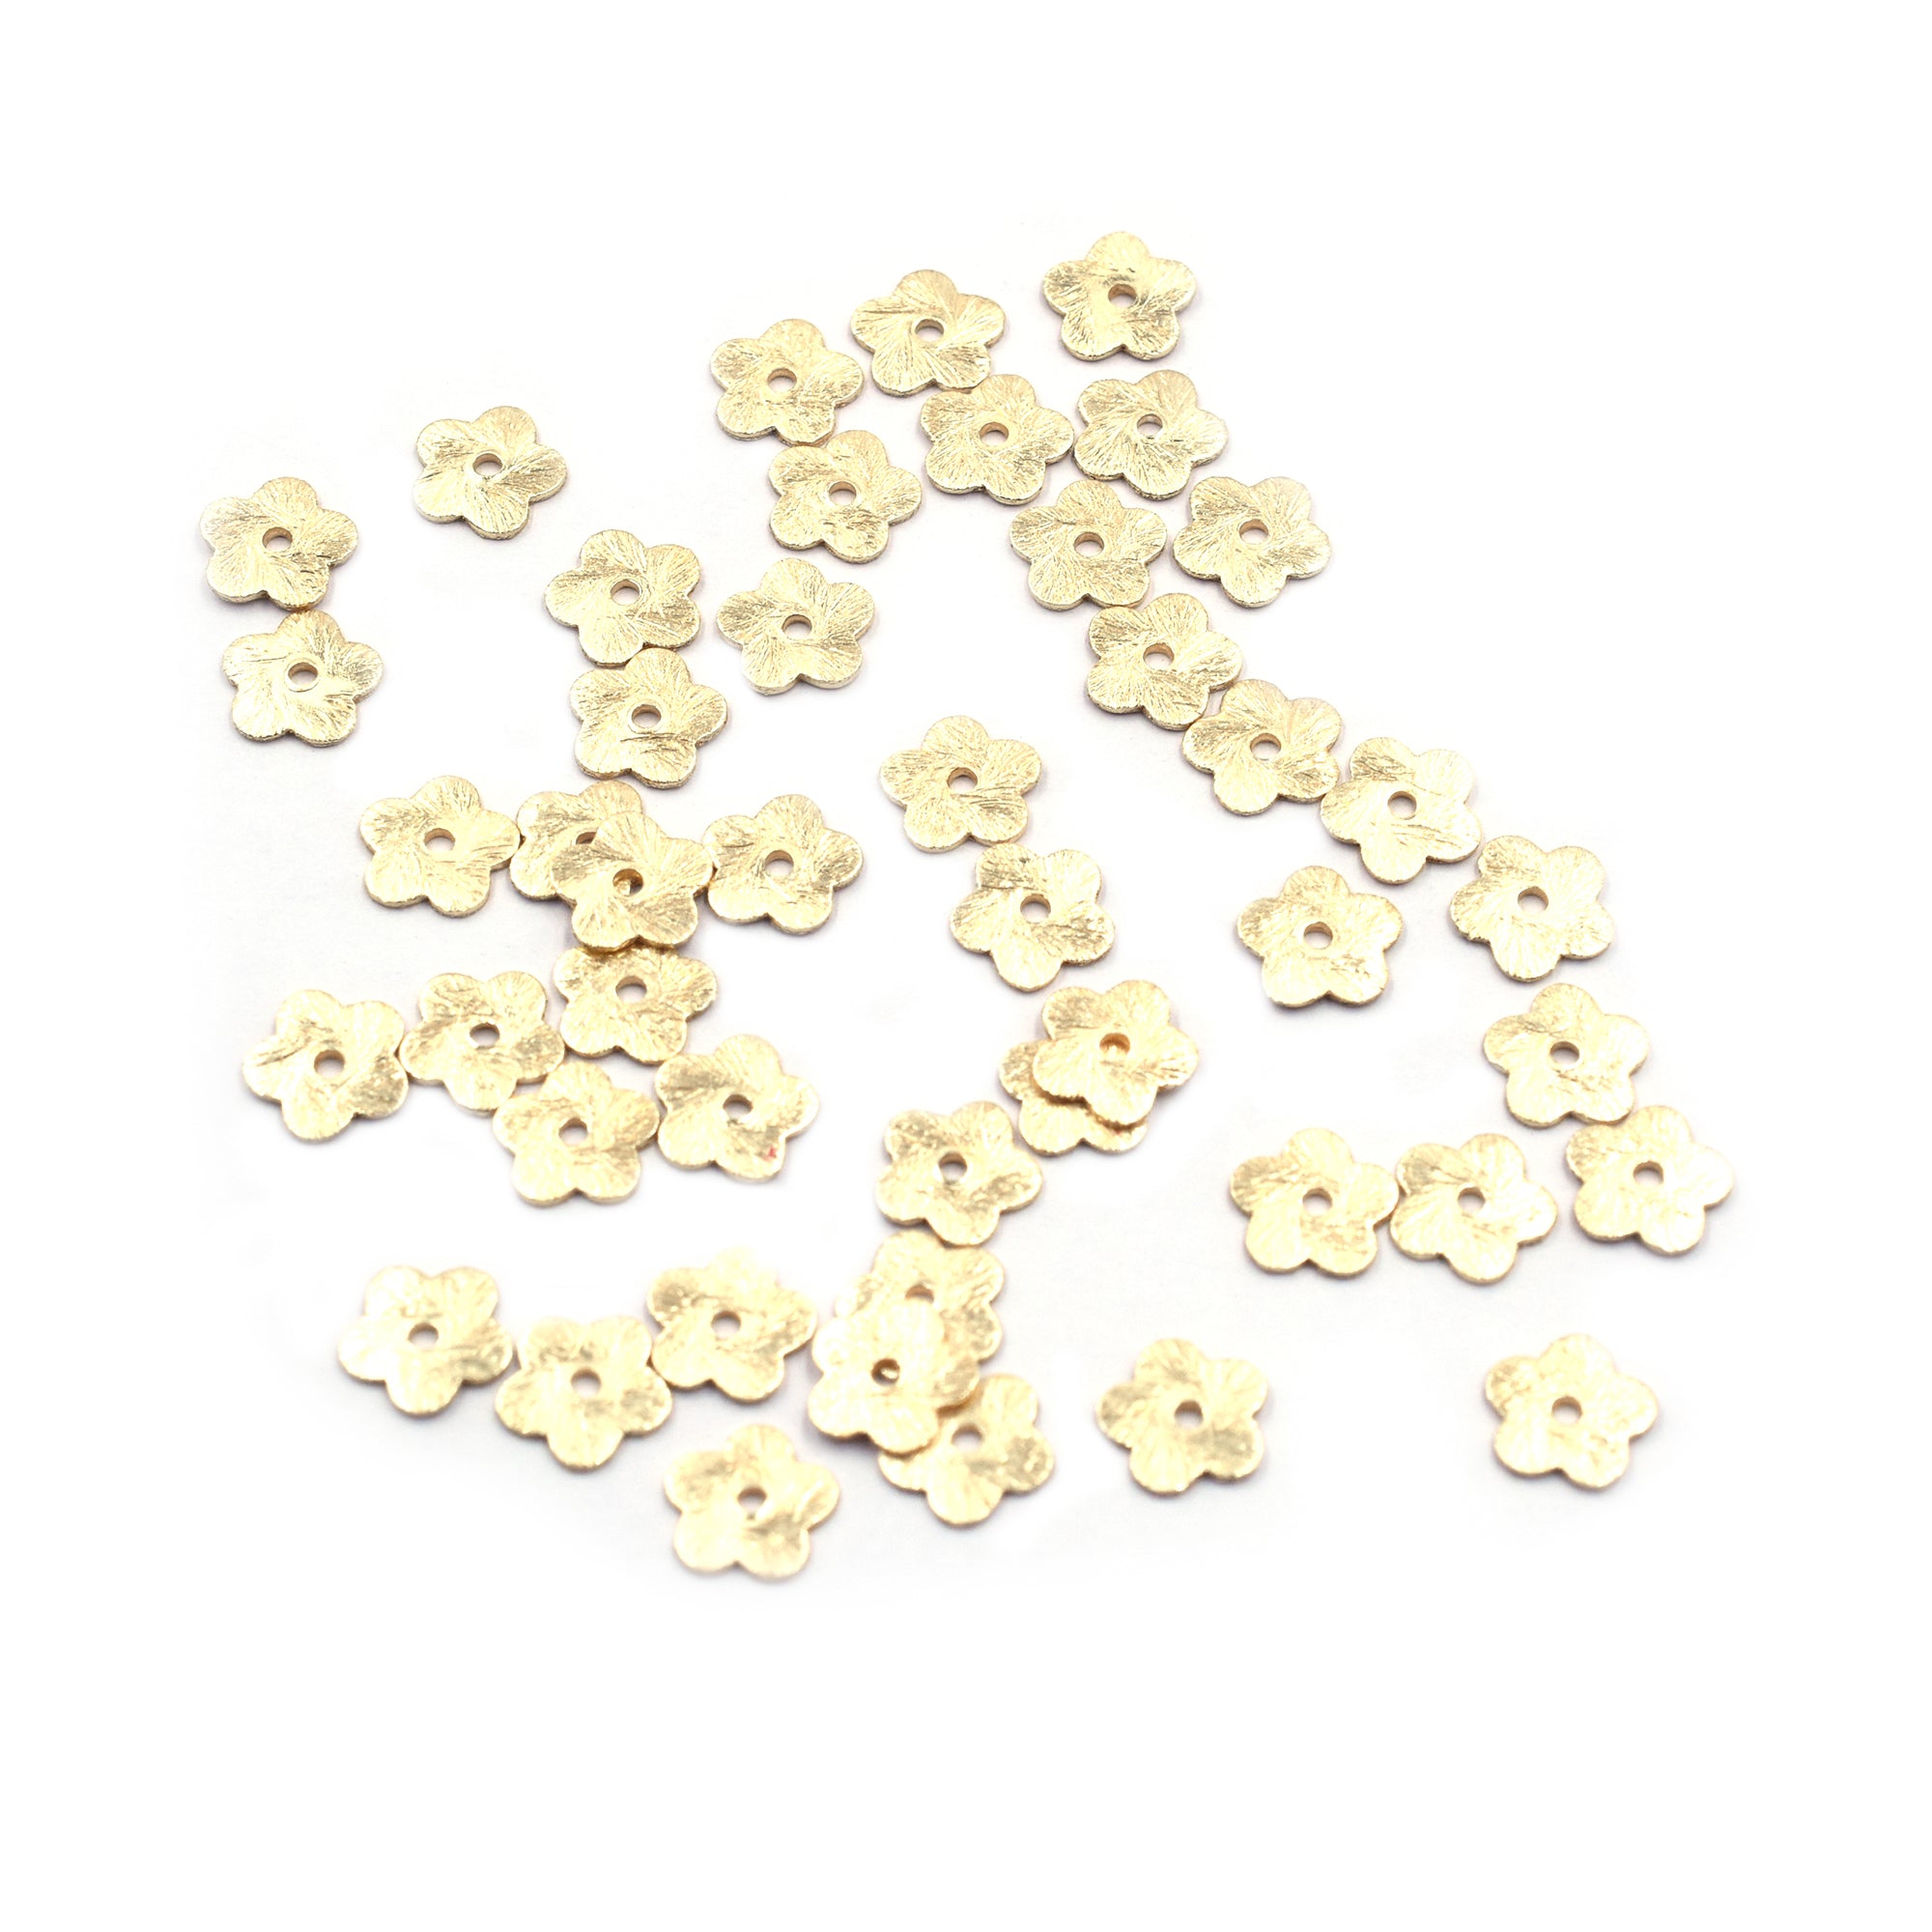 100 Pcs 8mm Flower Disc Brushed Matte Finish Beads Gold Plated Copper